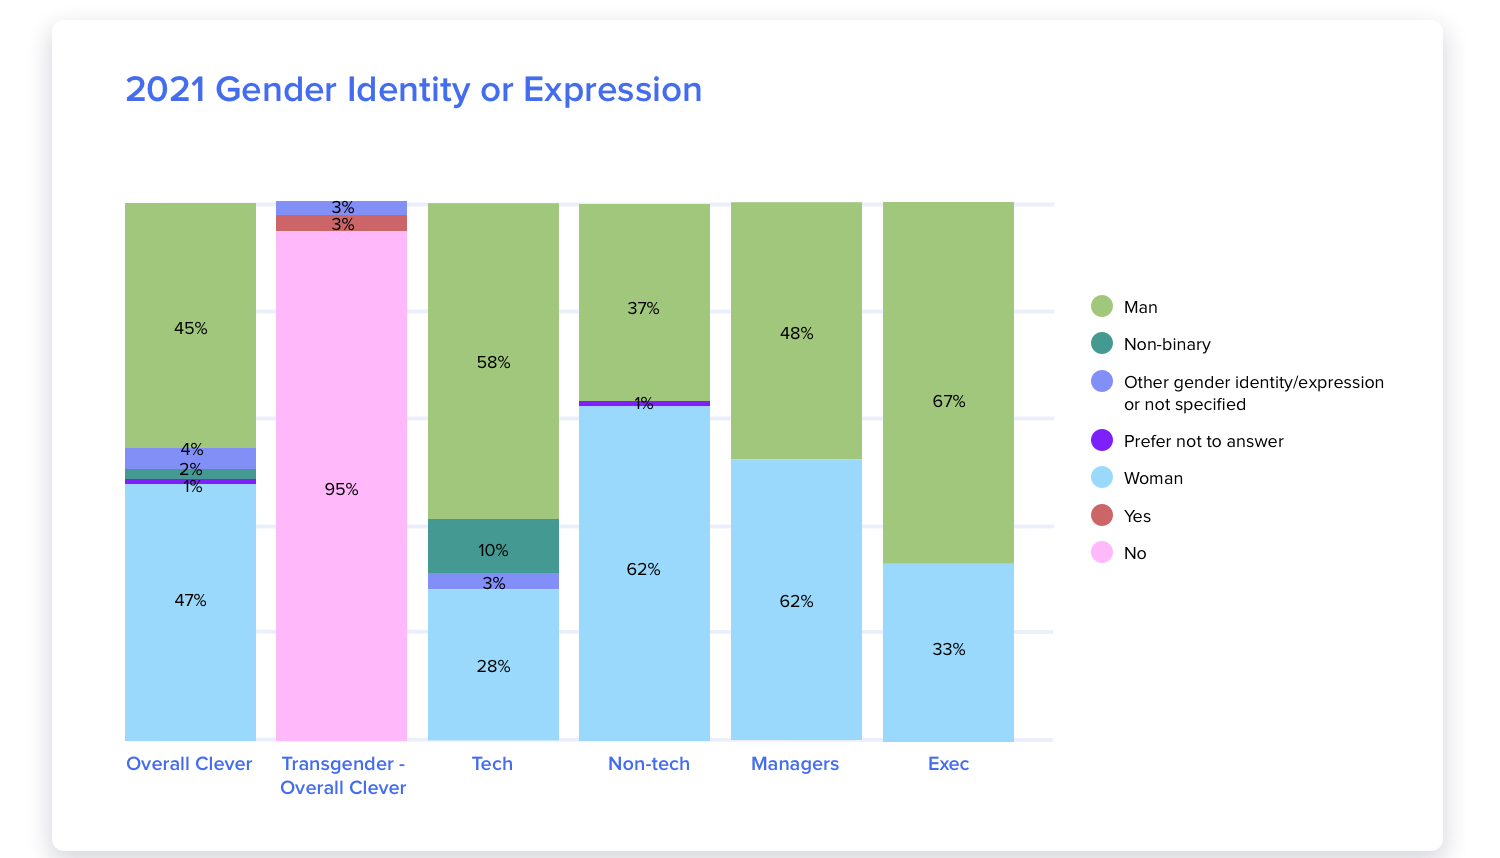 Gender identity and expression overall - 45% Men, 4% Non-binary, 2% Other gender identity/expression or not specified, 1% Prefer not to answer, 47% Women; Transgender - 3% Not specified, 3% Yes, 95% No